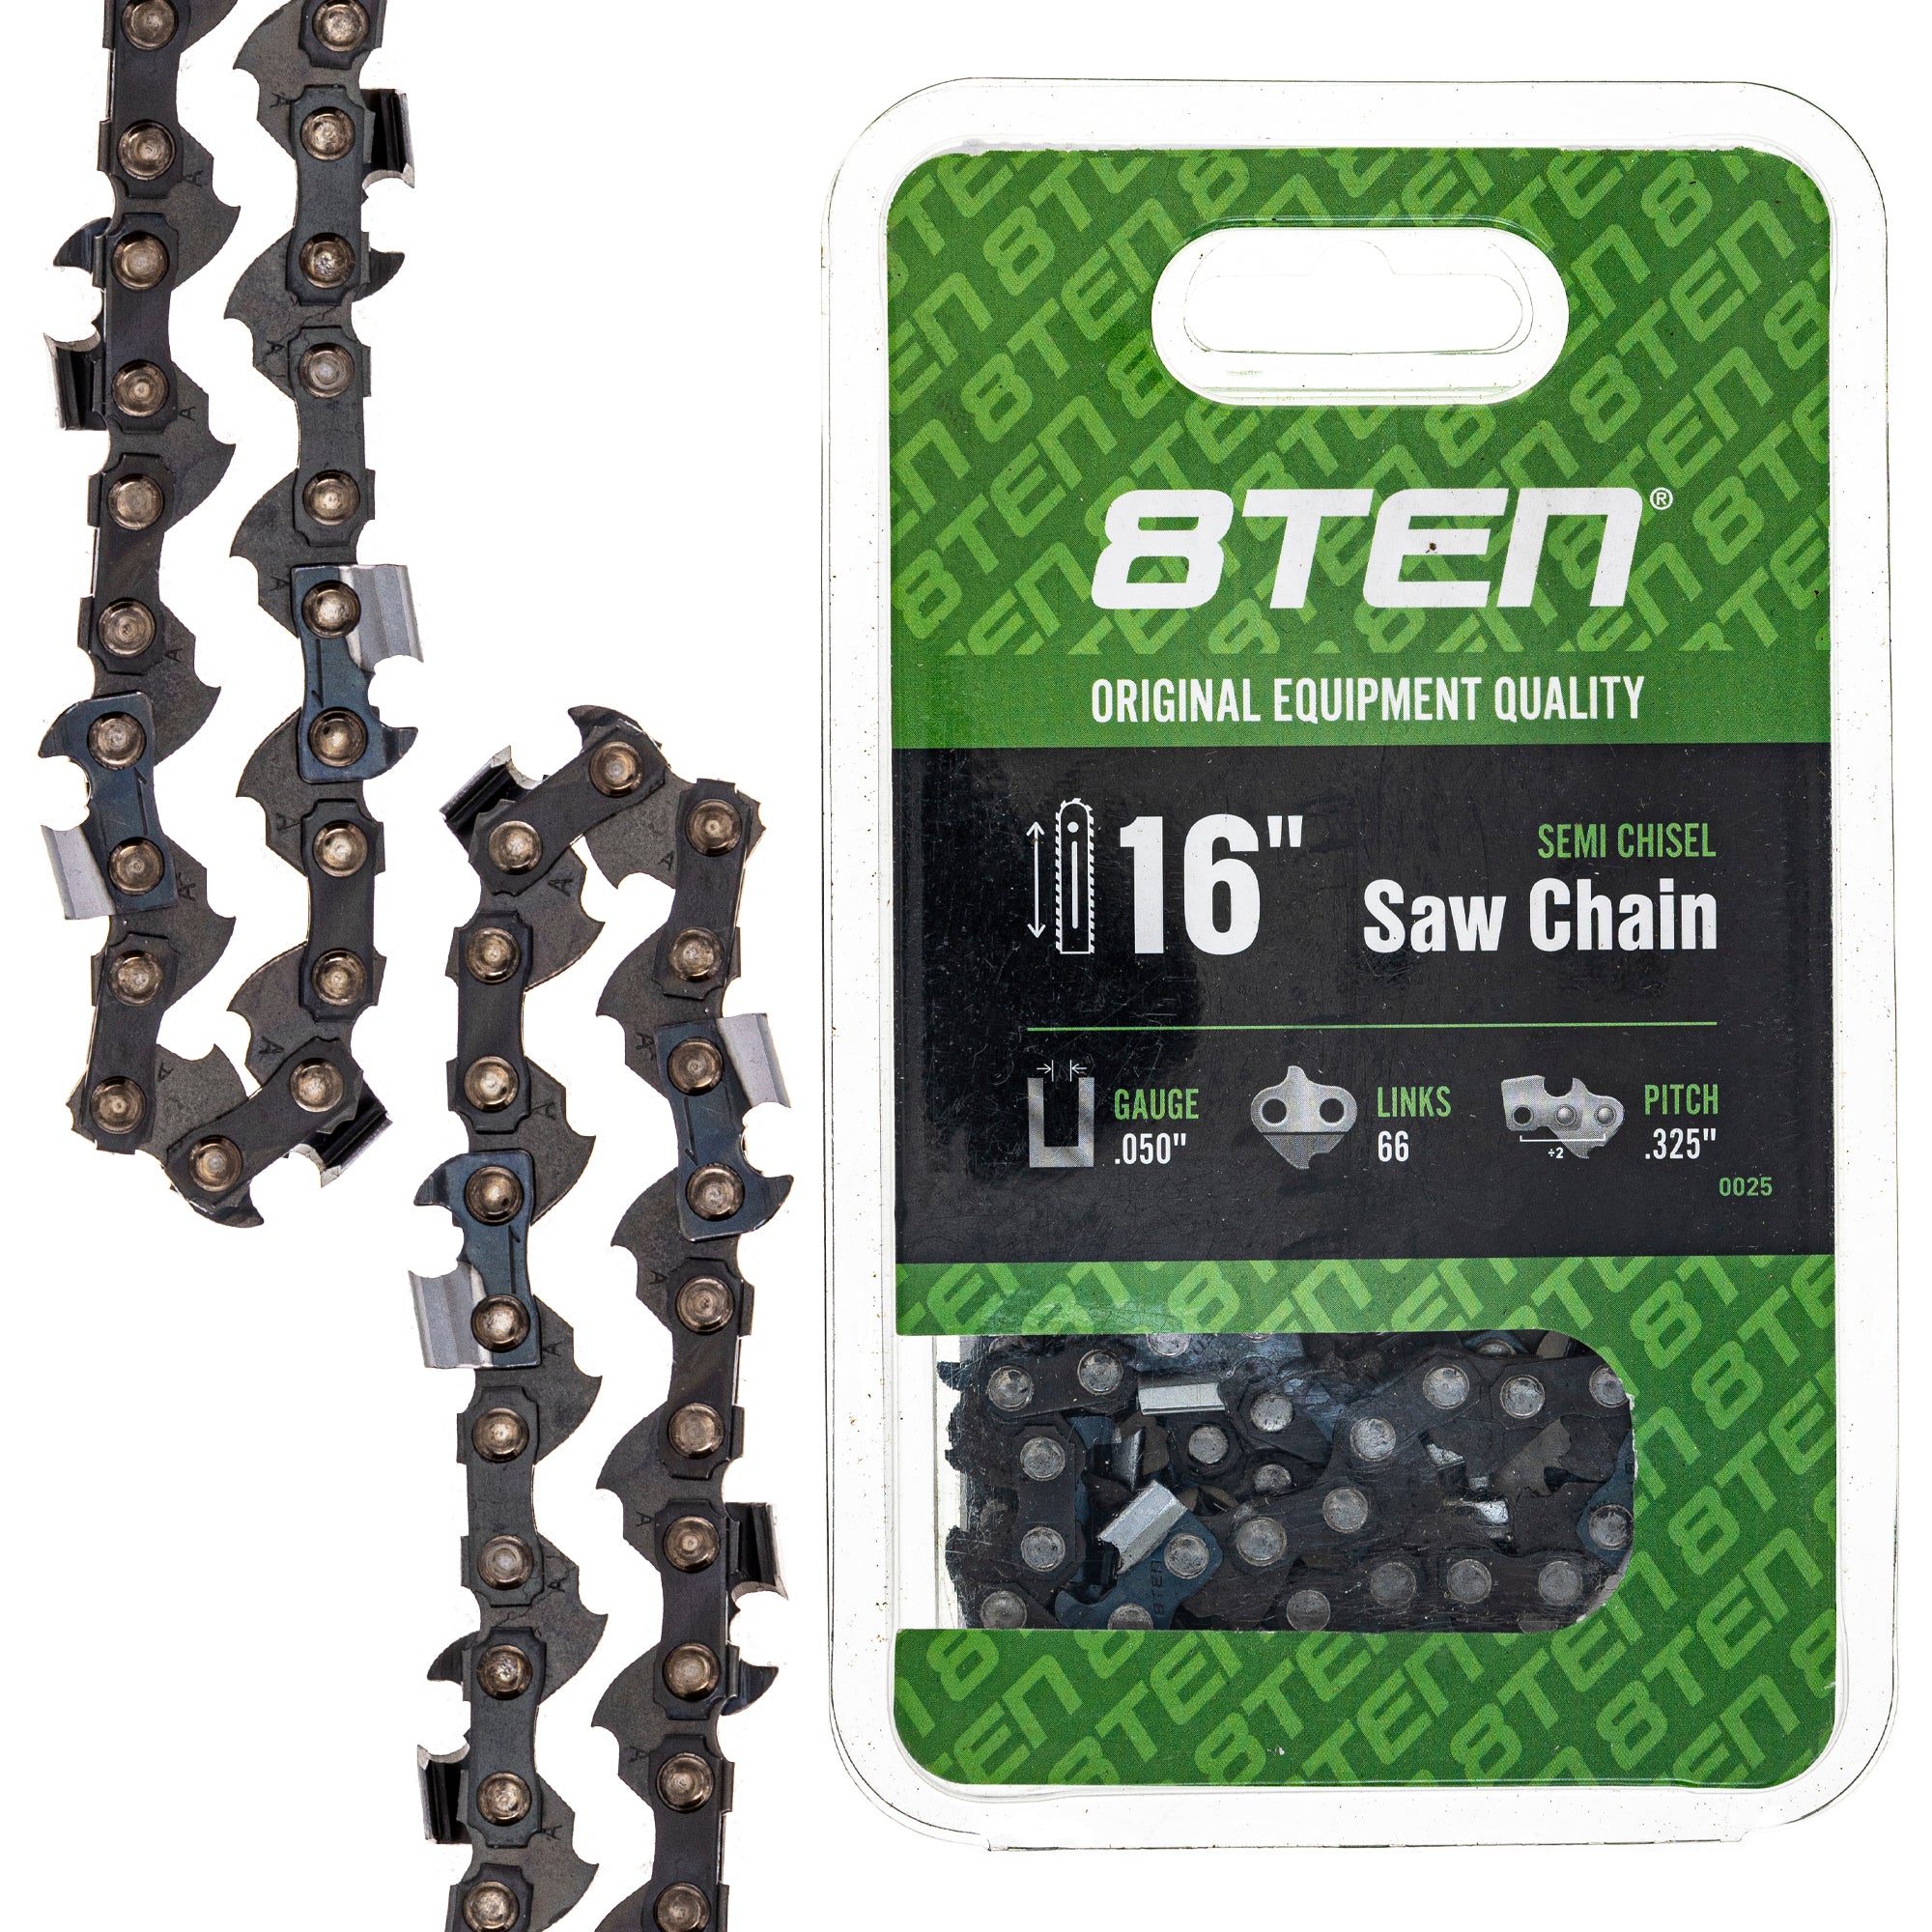 Chainsaw Chain 16 Inch .050 .325 66DL for zOTHER Windsor Stens Oregon Ref. Oregon 8TEN 810-CCC2247H